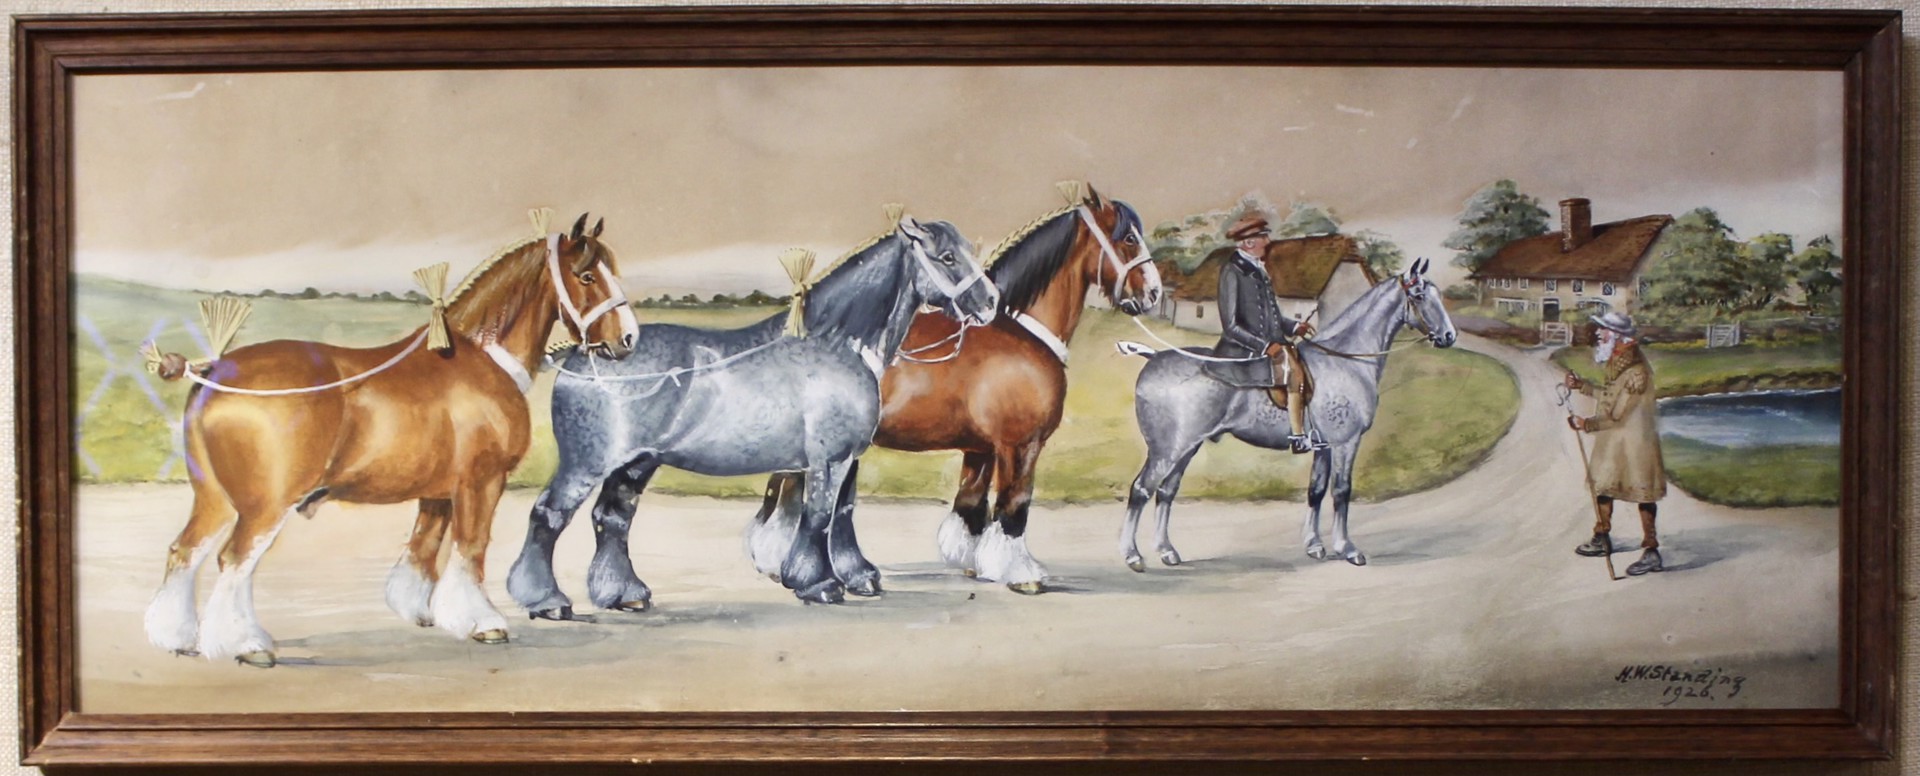 SHIRE HORSES (a pair) by William Henry Standing